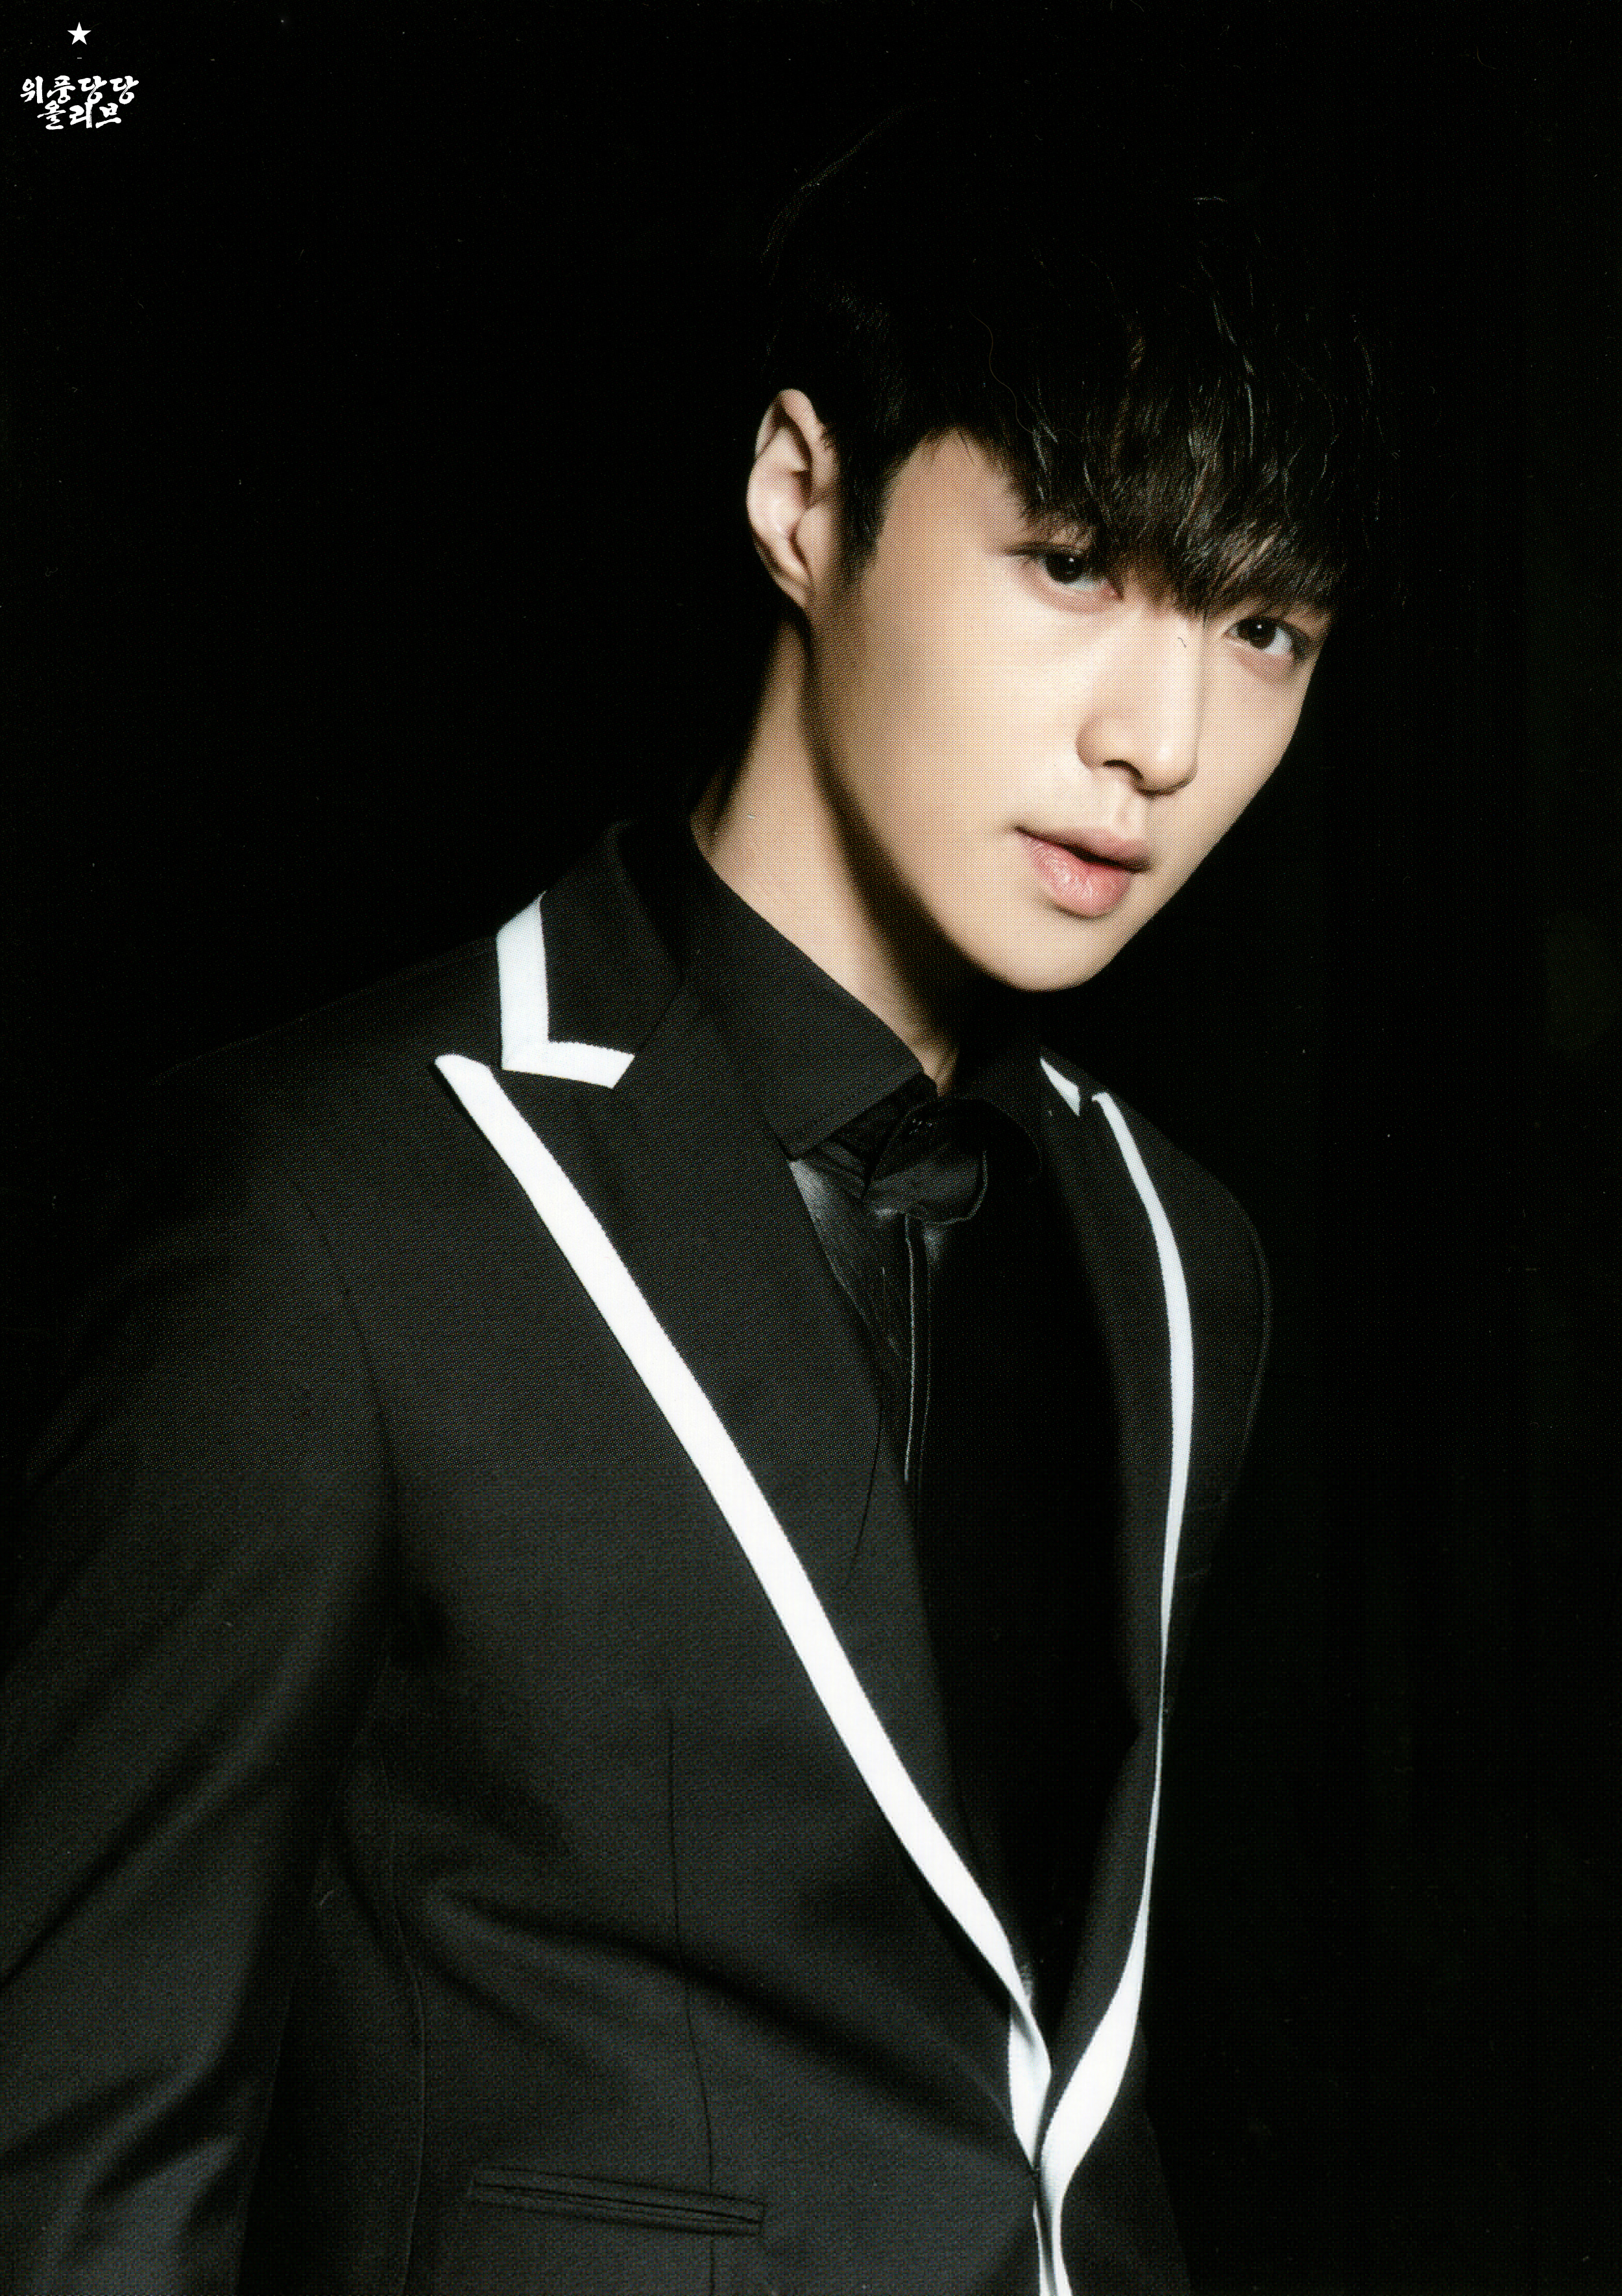 https://psychofriend.files.wordpress.com/2014/06/140622-lay-exo-new-picture-for-overdose-postcard-pop-up-store-scan-by-oliv_xoxo.jpg